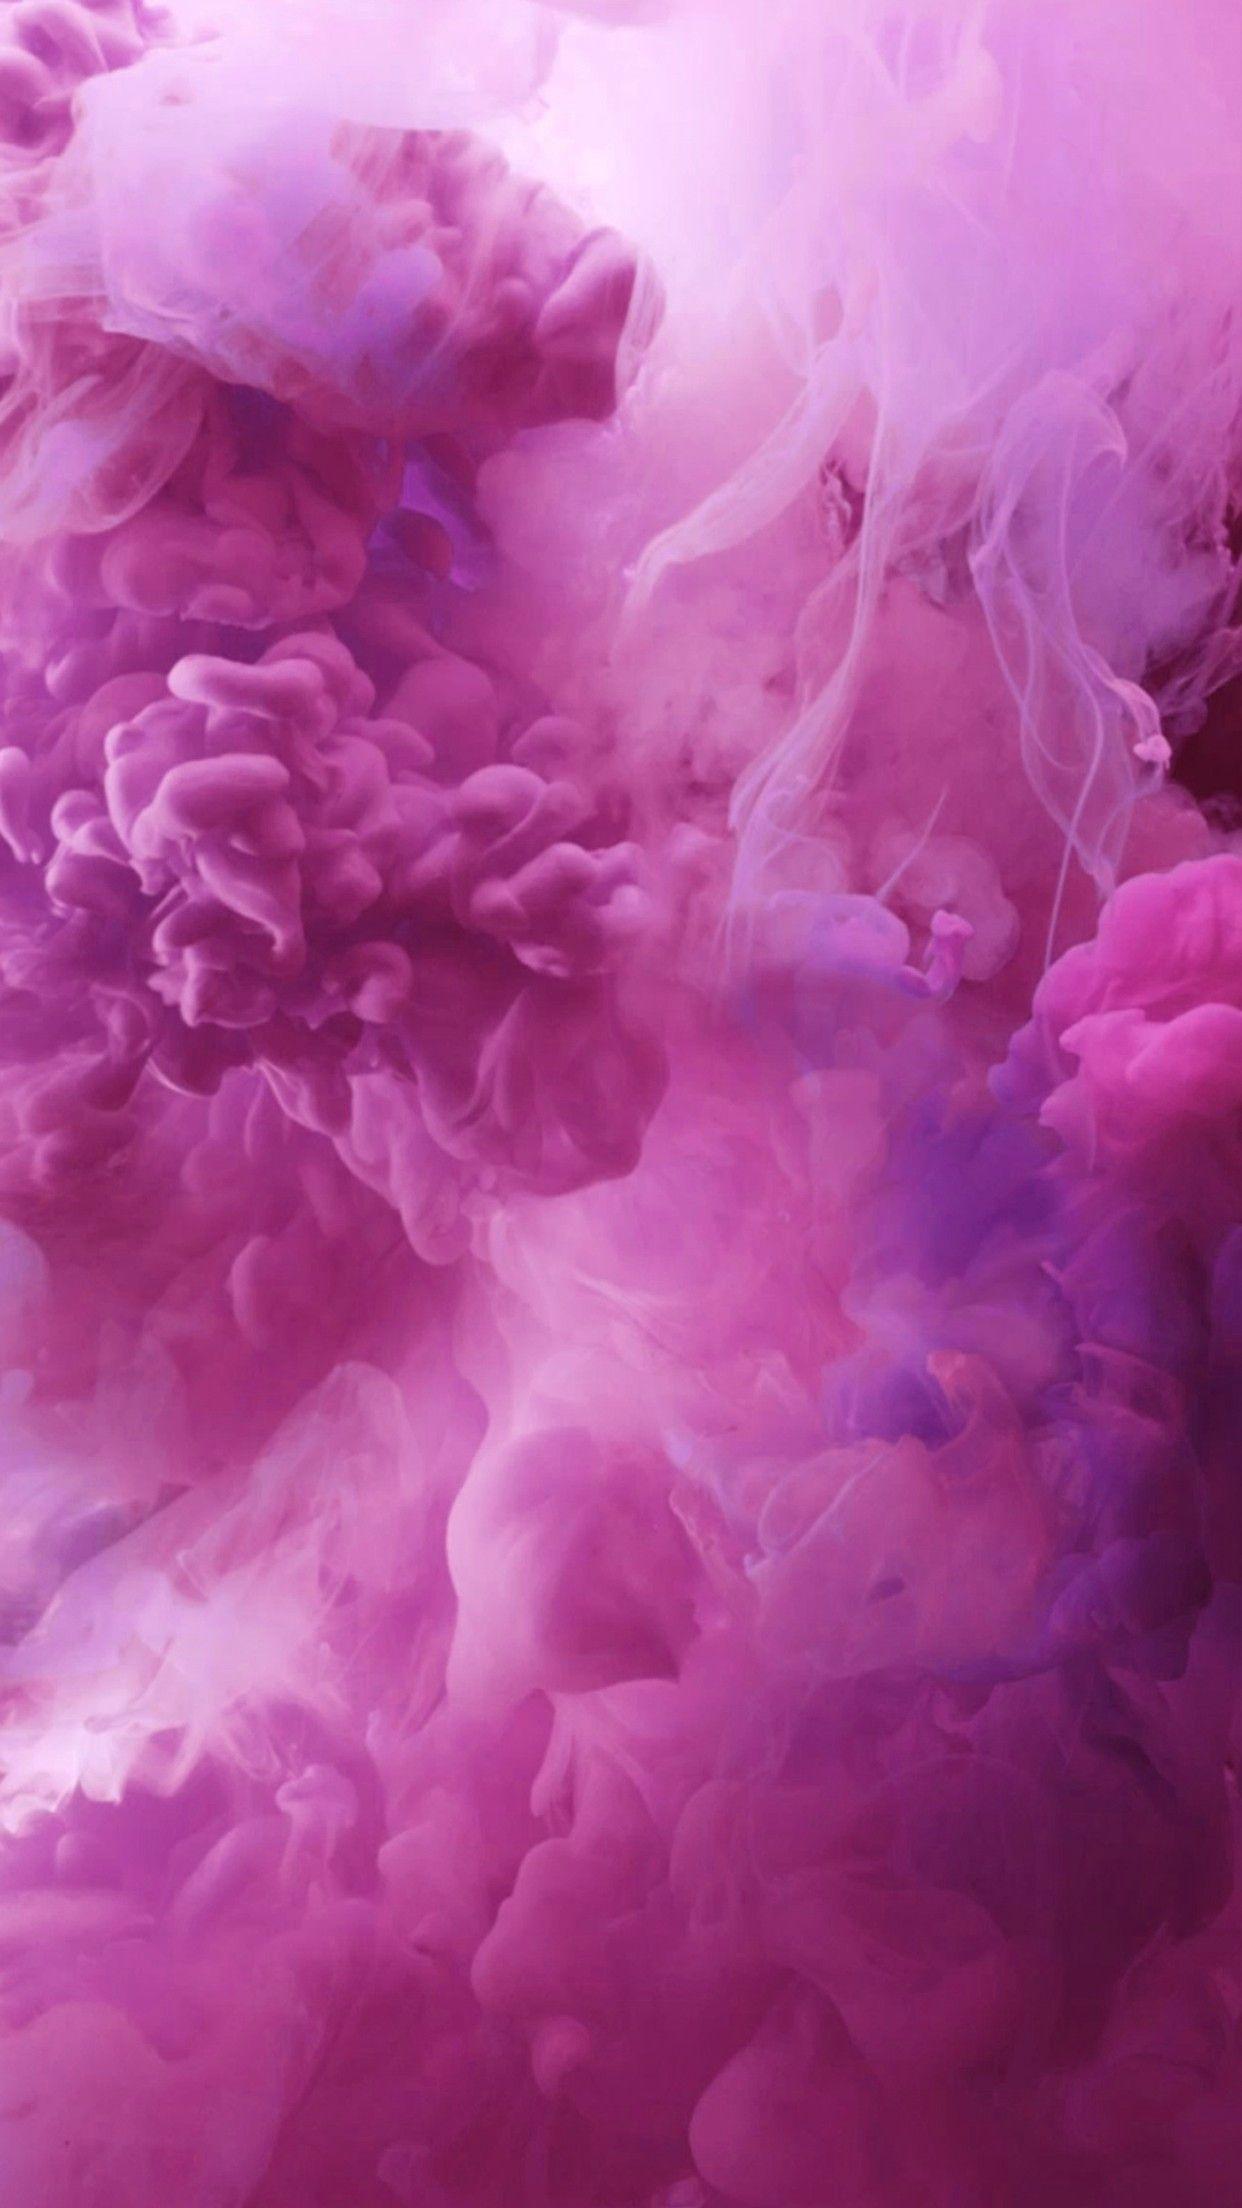 Trippy Smoke  Backgrounds  Tumblr  Wallpaper  Cave